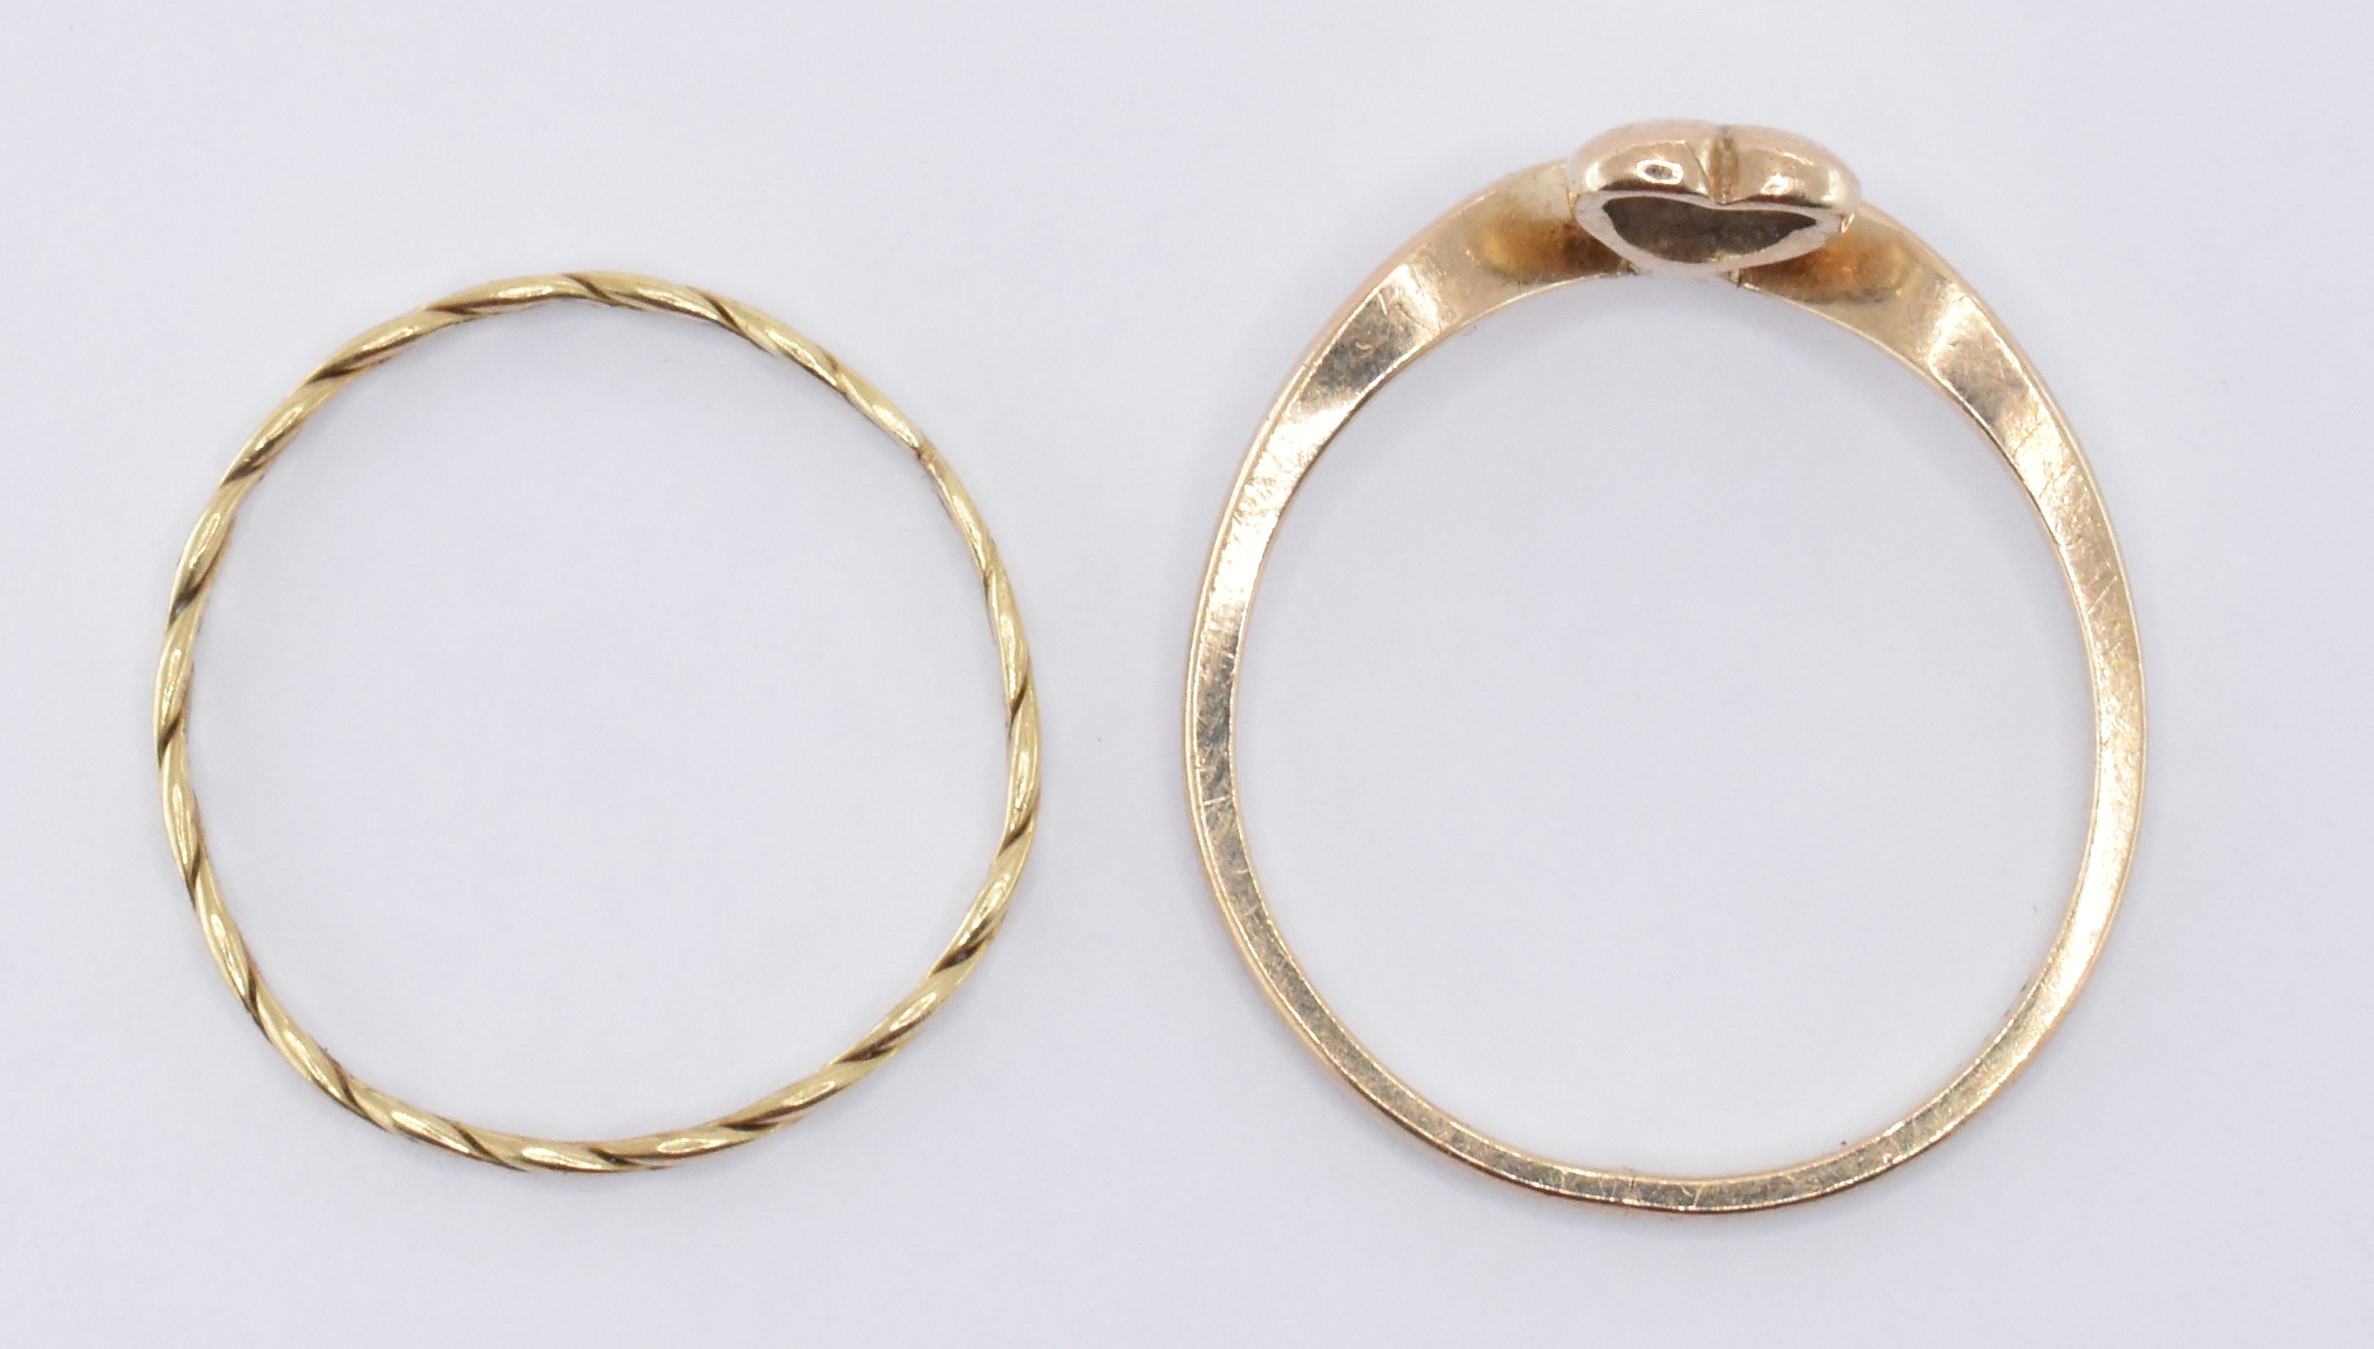 9CT GOLD HEART RING & 14CT GOLD ROPE TWIST RING - Image 7 of 7